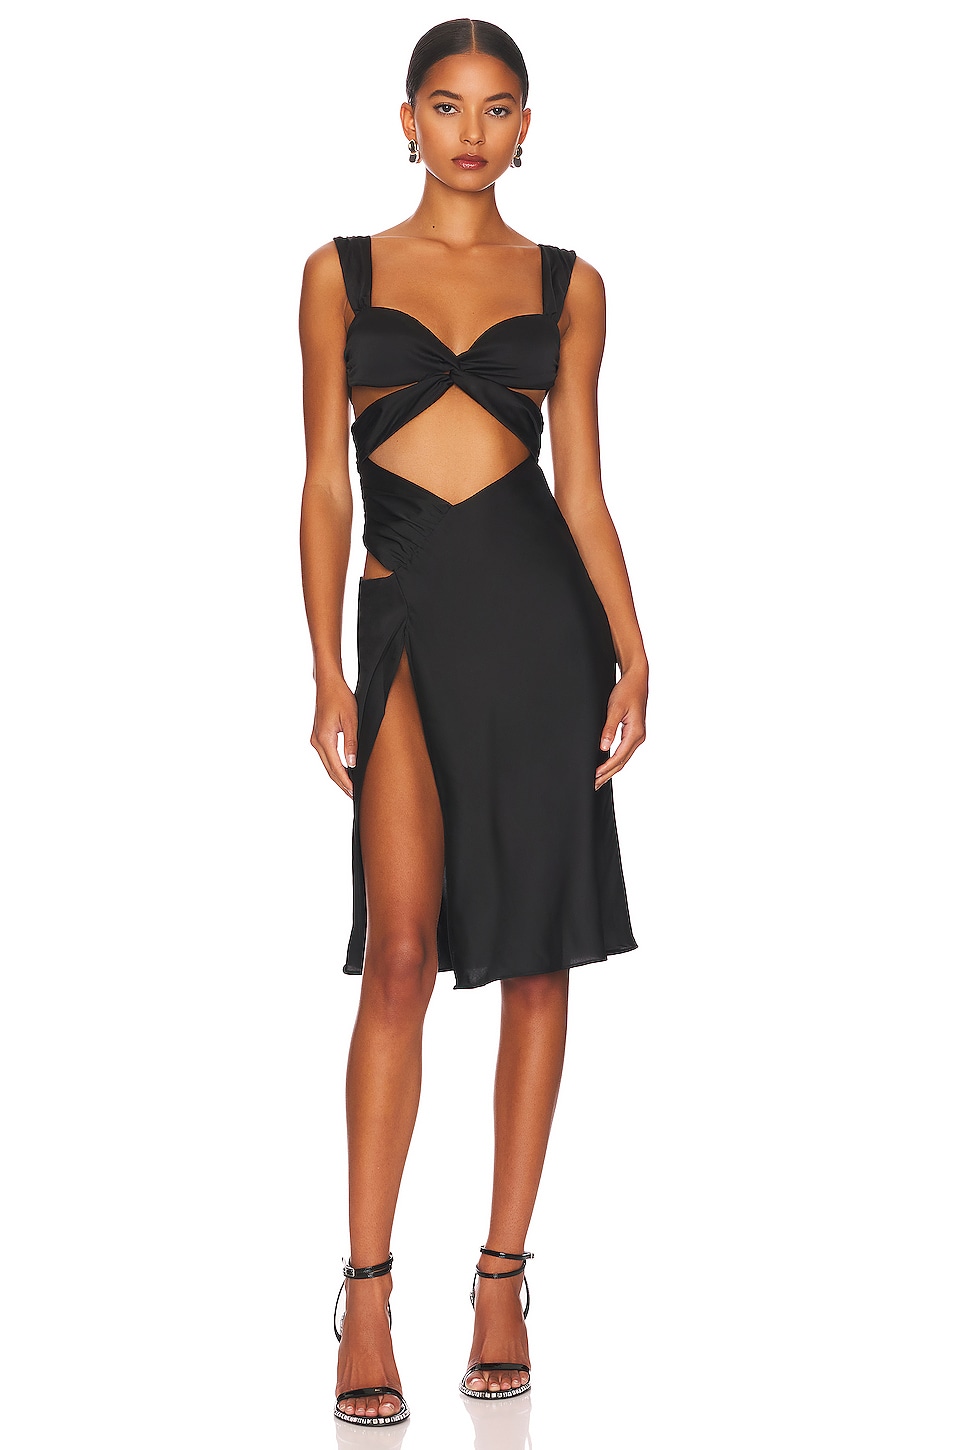 Black cut out dress for going out